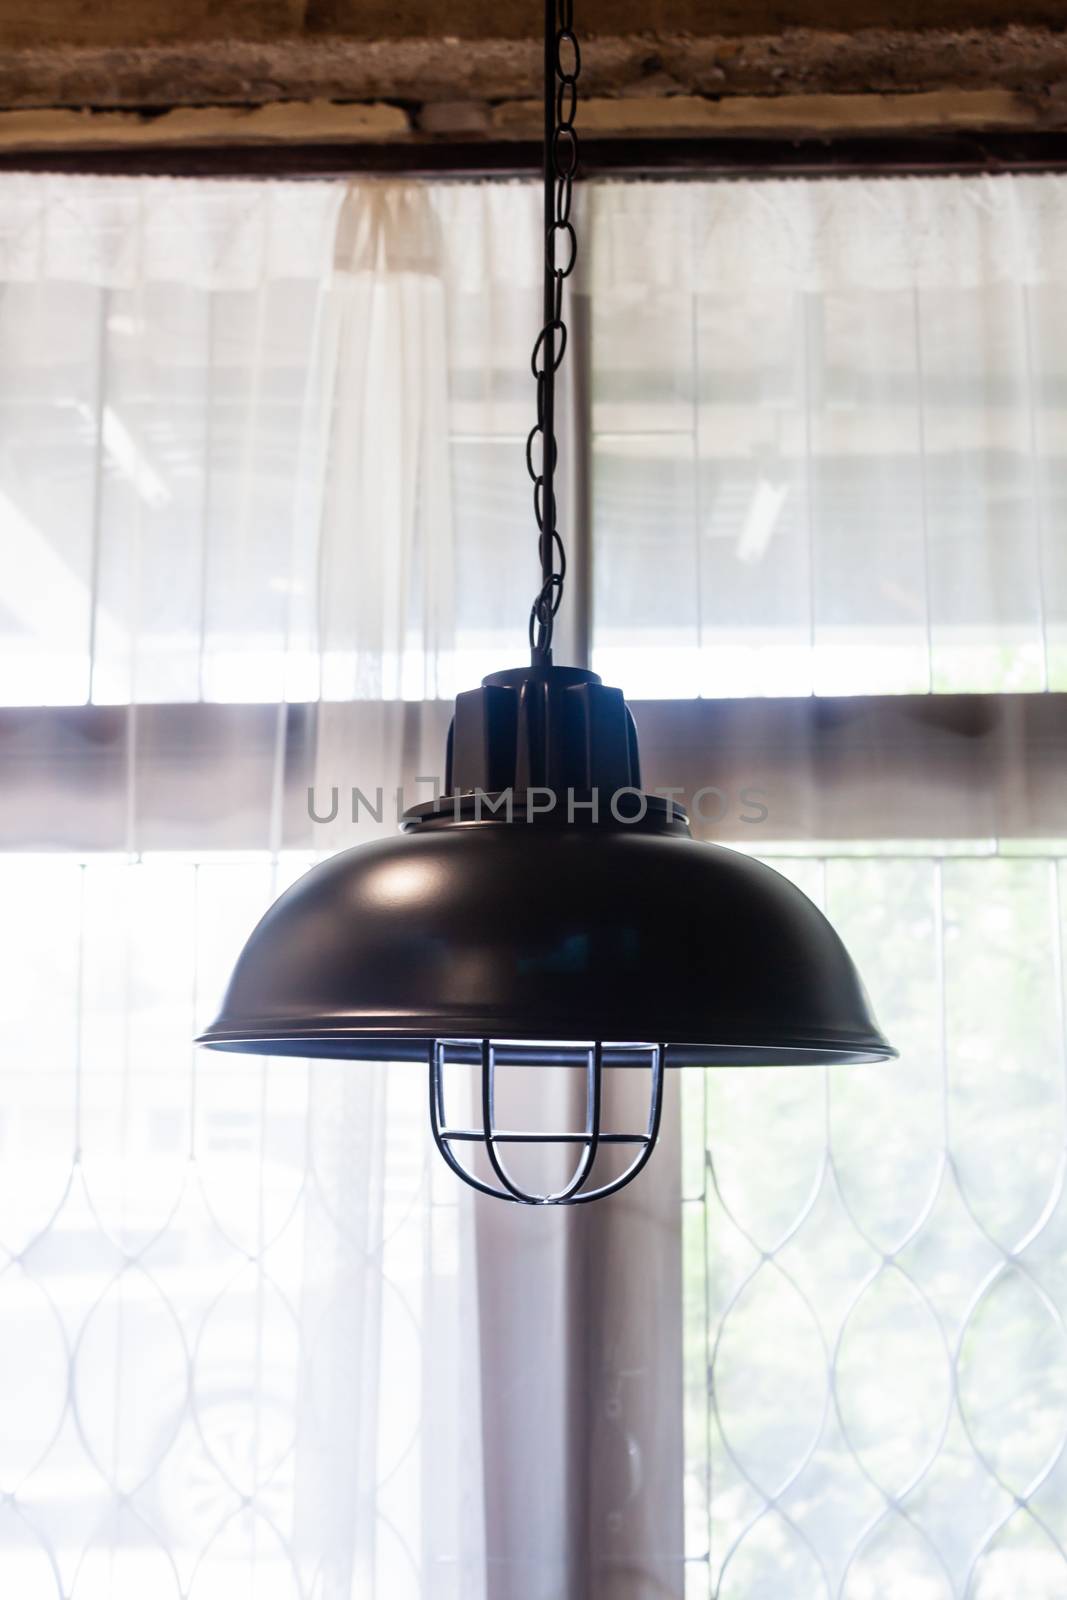 Lamps in a modern cafe, stock photo